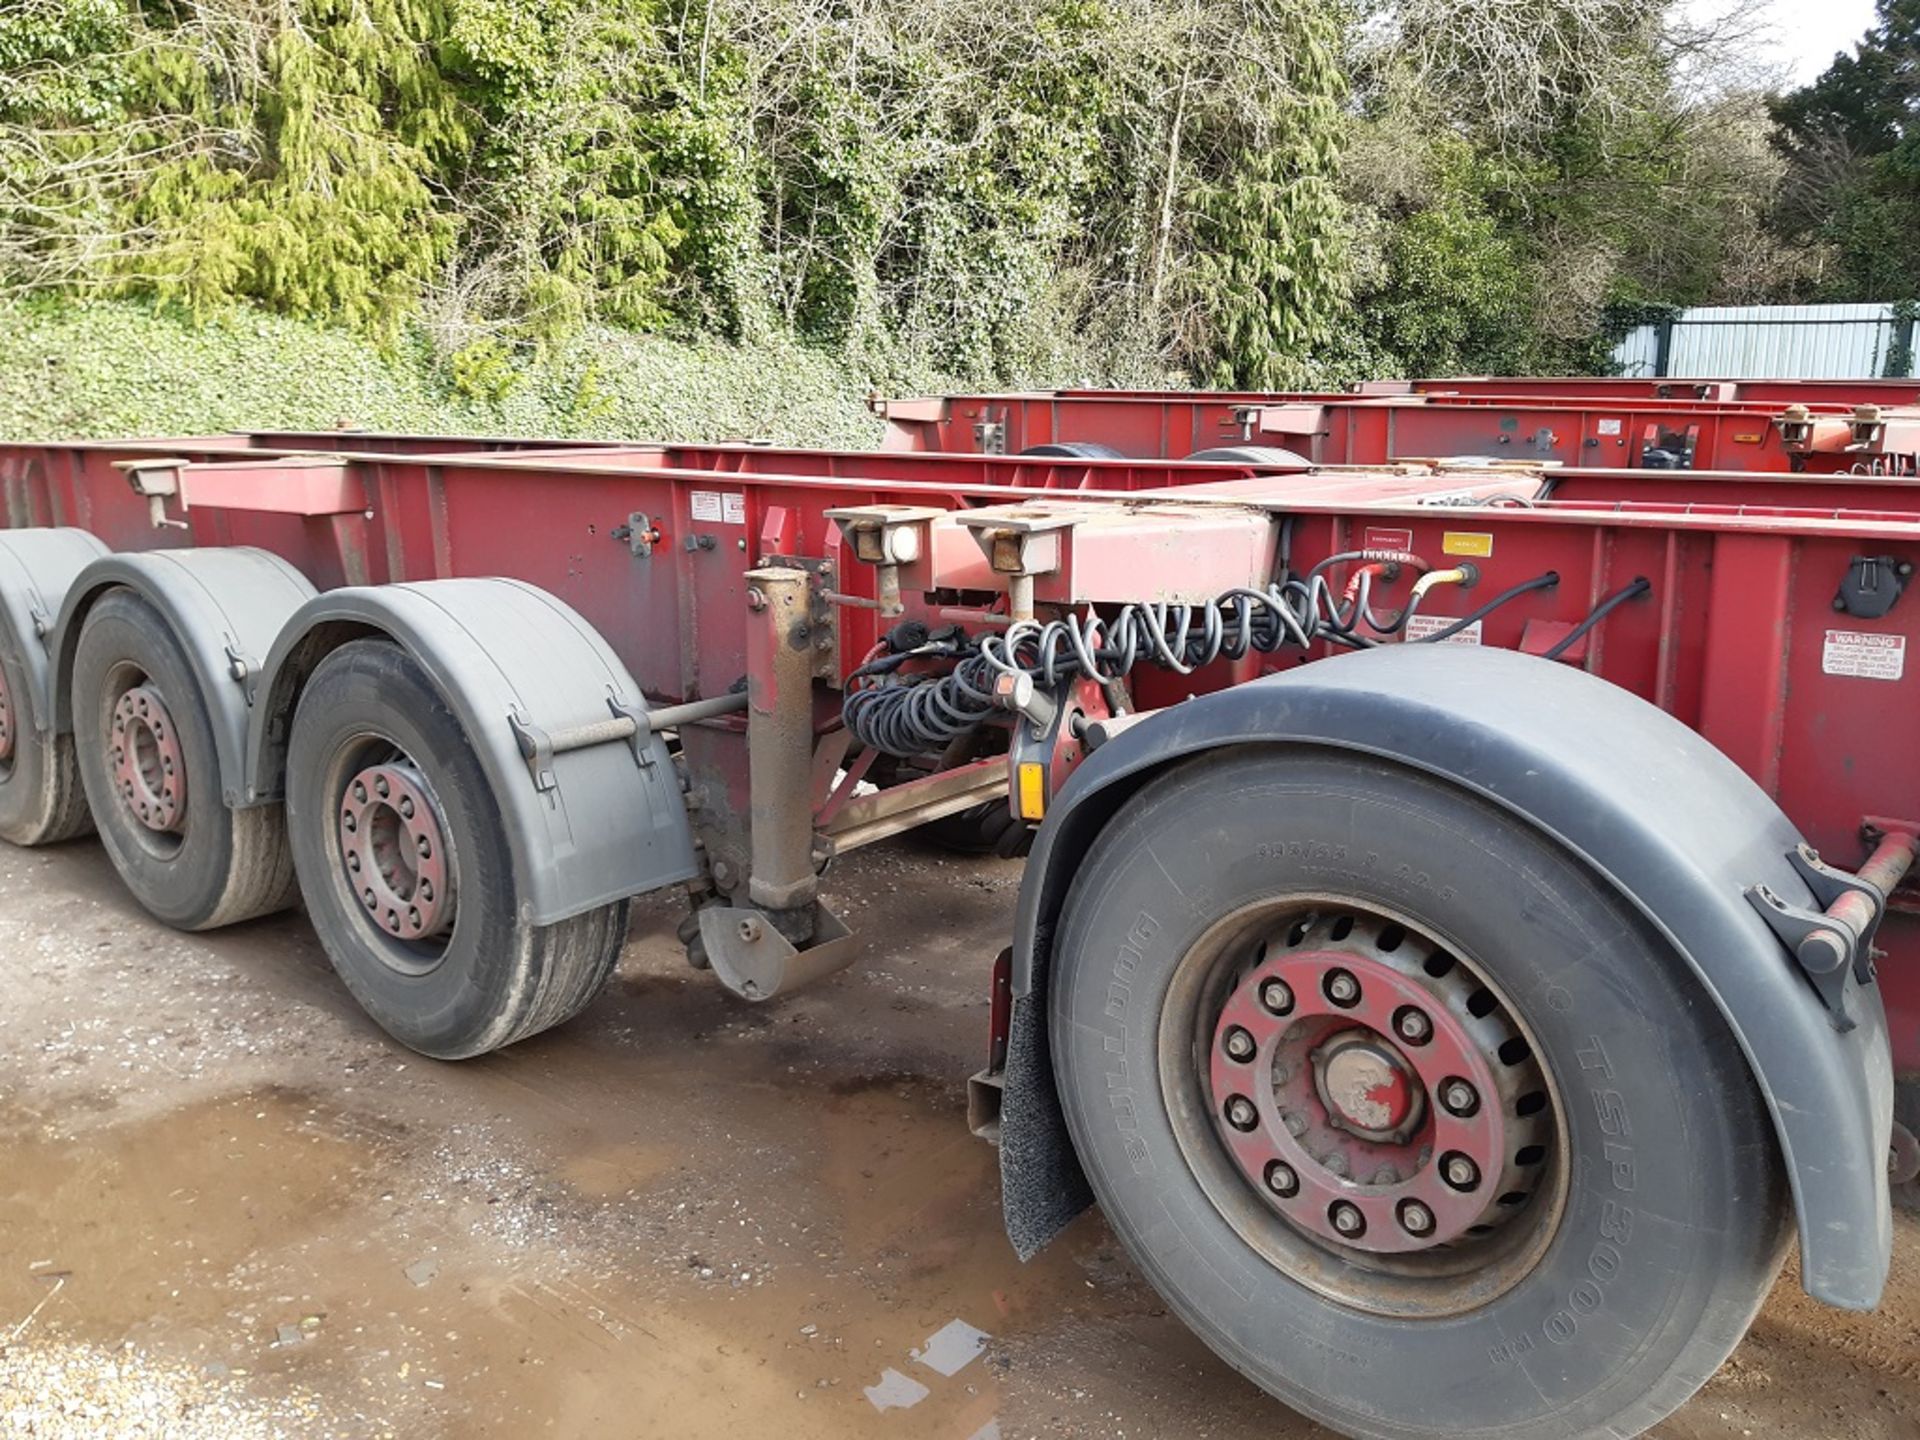 Red Dennison Four Axle (one drop axle) Multifunction Skeletal Trailer (2006) - Image 2 of 14